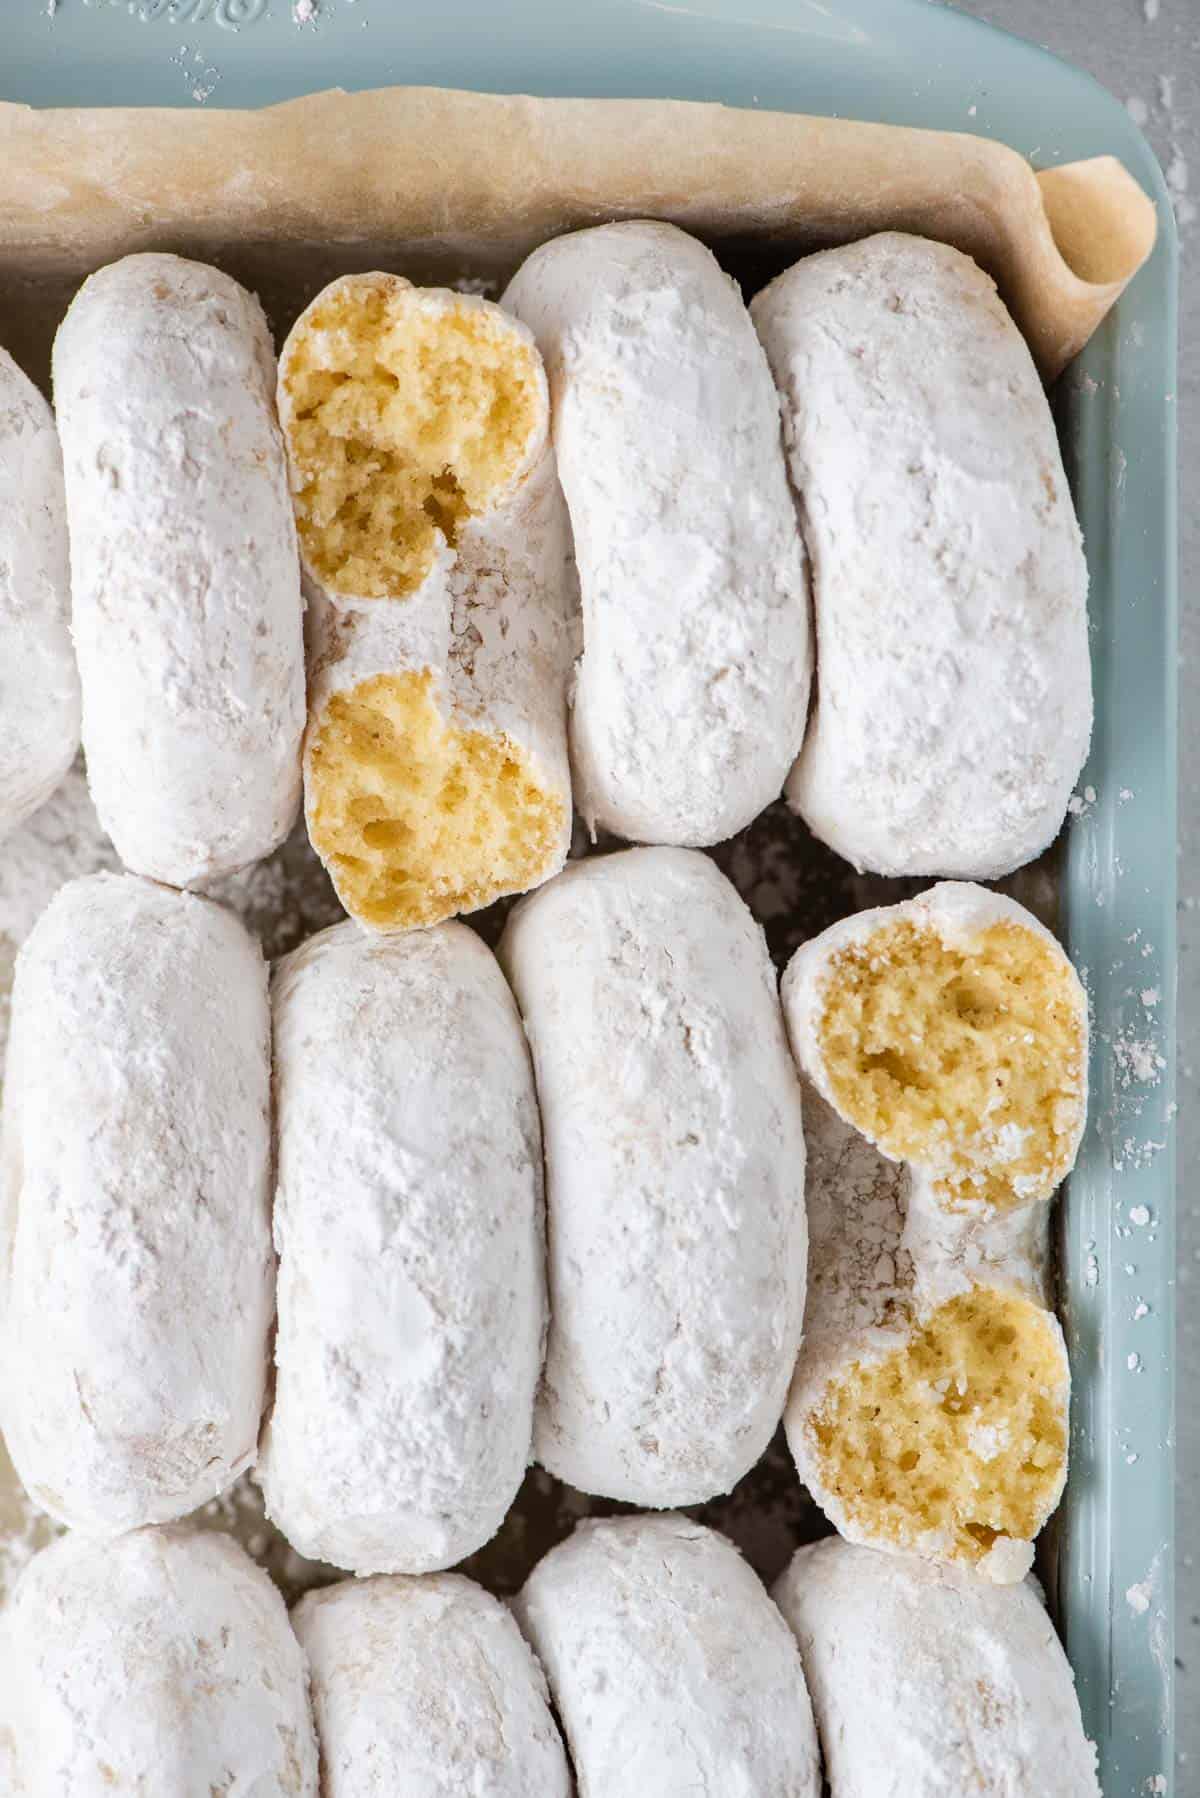 Powdered Sugar Donuts lined vertically side by side in a teal baking dish lined with brown paper